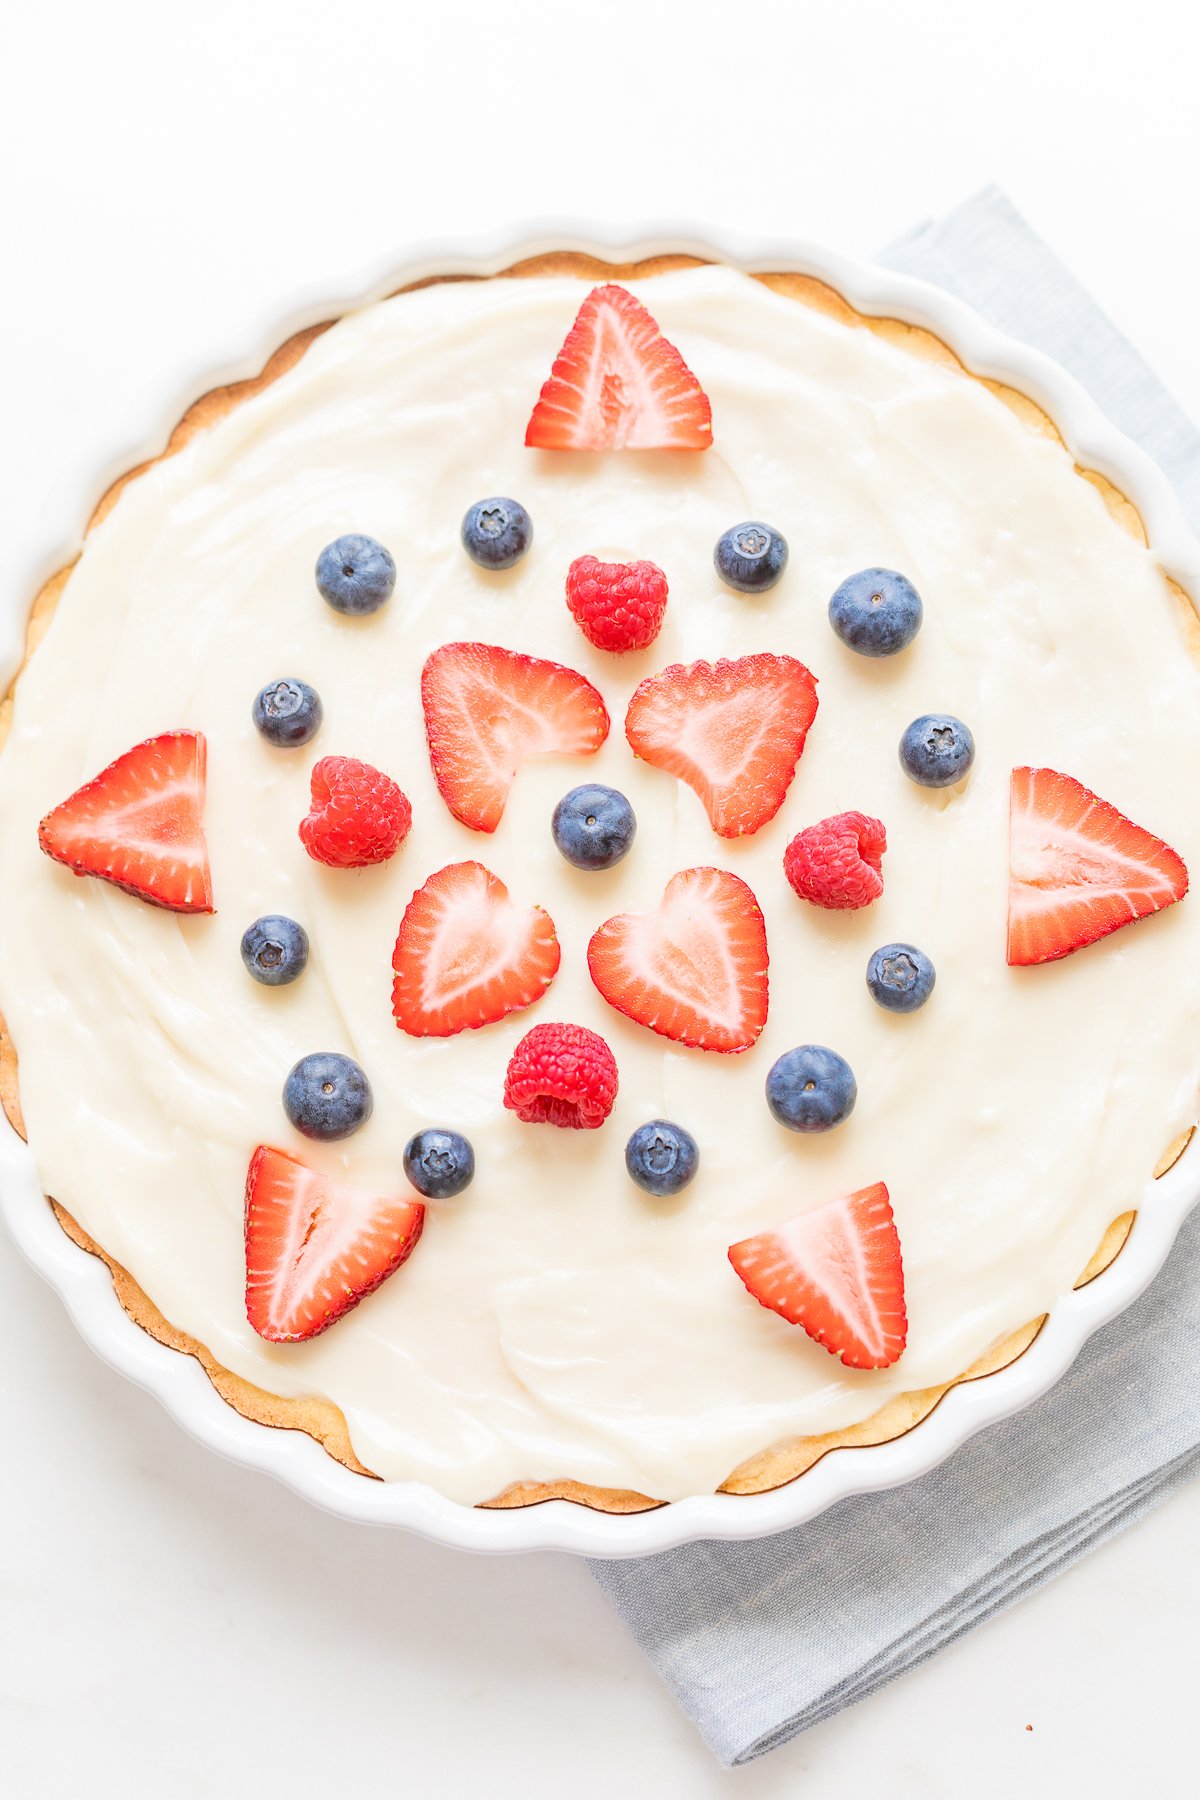 A close up of a fruit pizza with cream cheese fruit pizza icing on top.